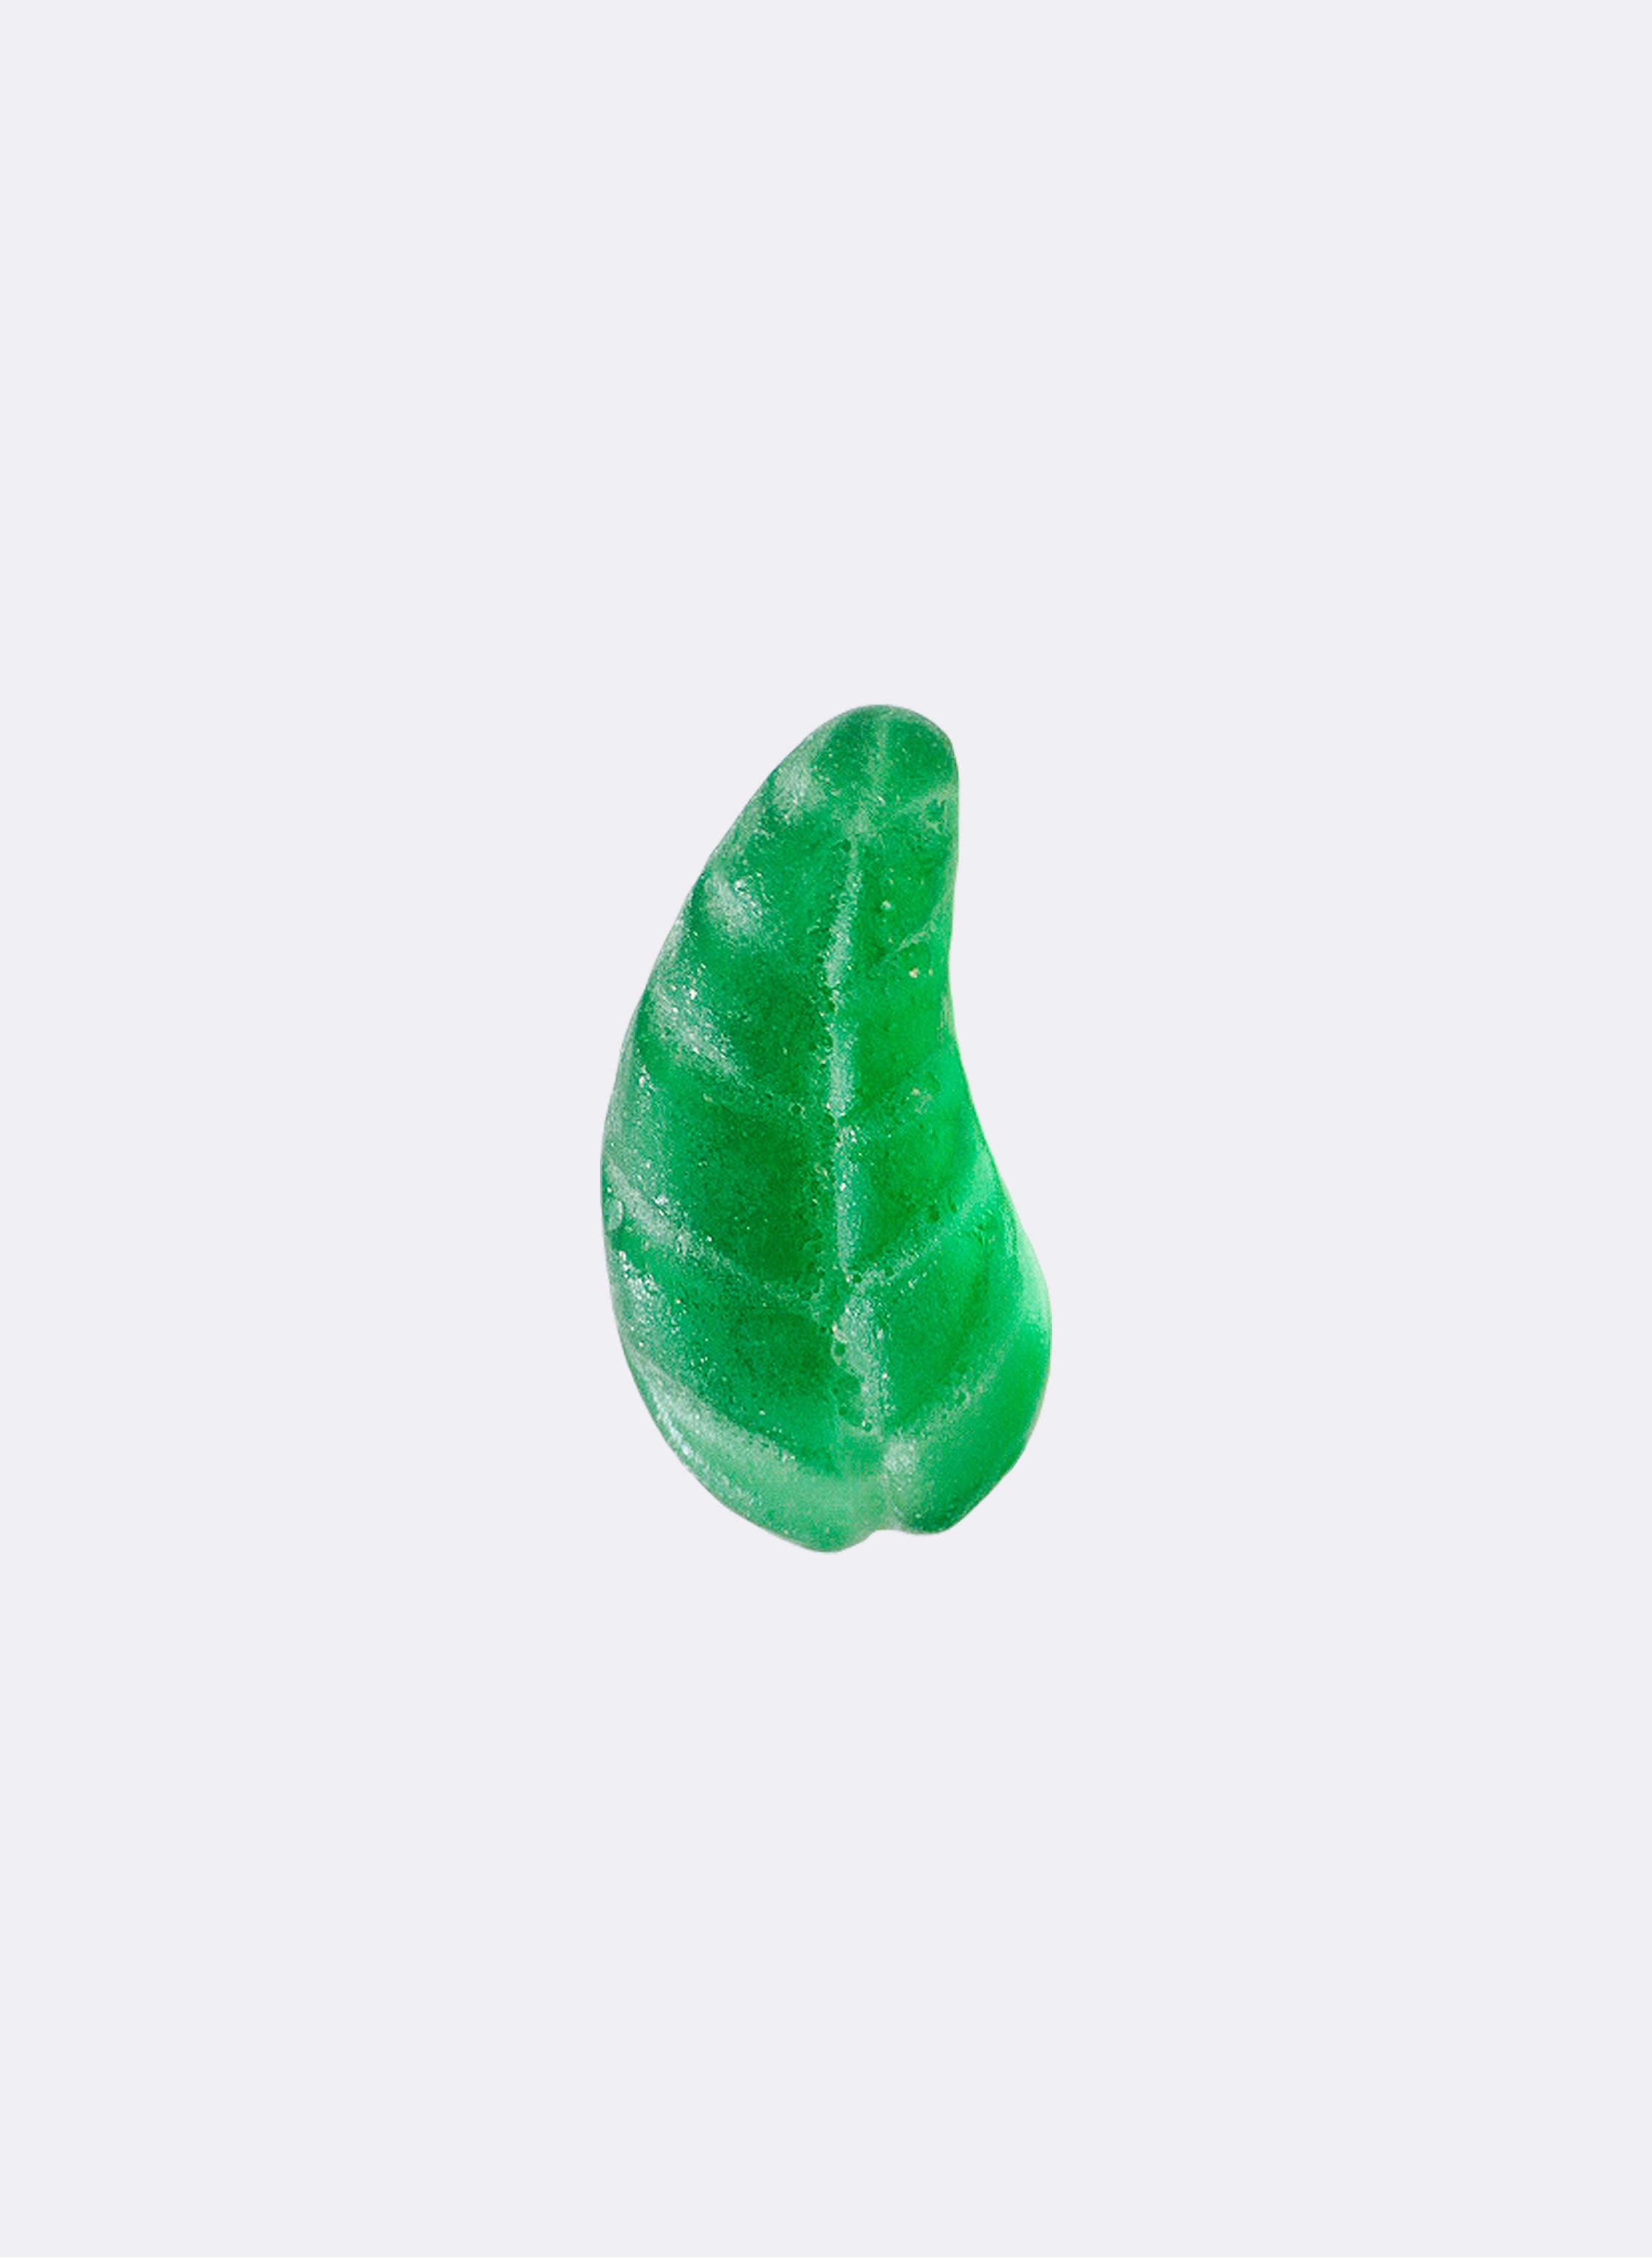 Small Cast Glass Spearmint Leaf Lolly